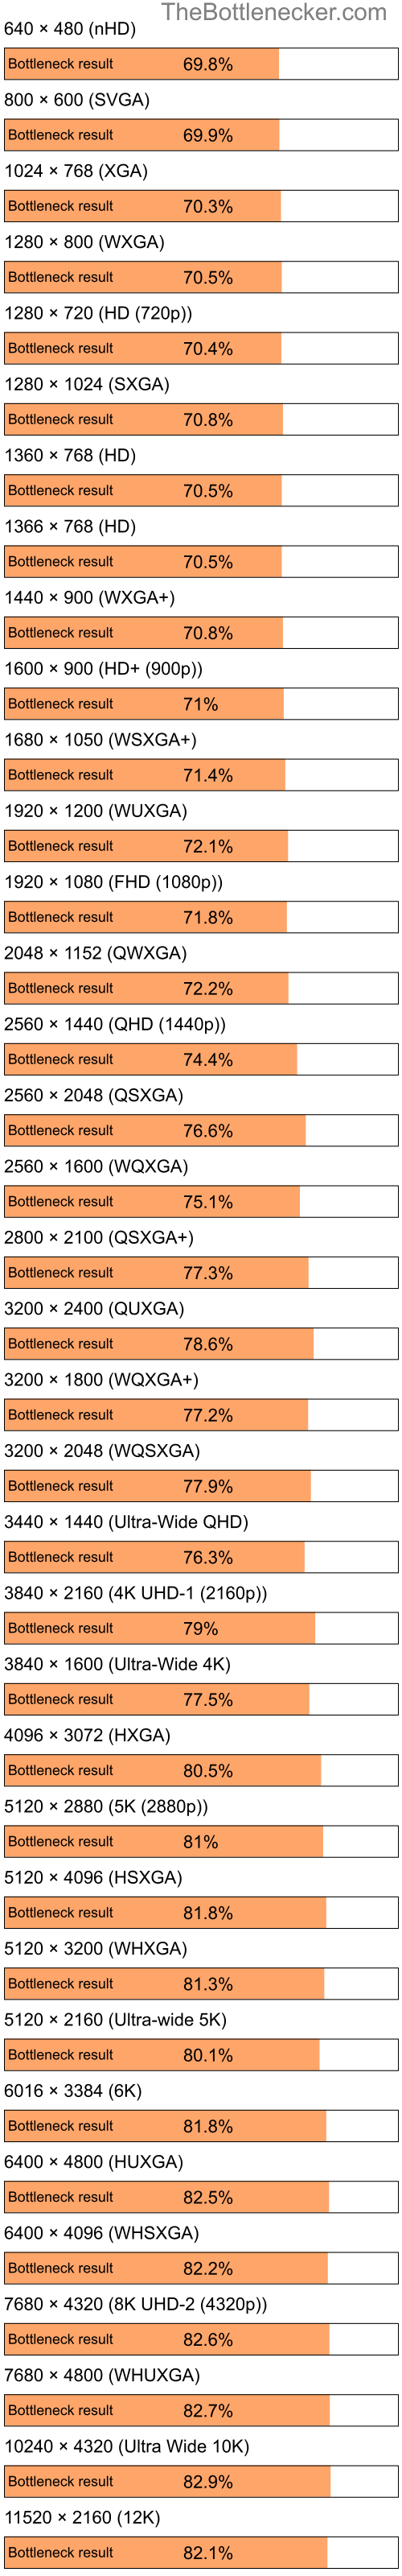 Bottleneck results by resolution for Intel Celeron M and AMD Mobility Radeon HD 3430 in Graphic Card Intense Tasks